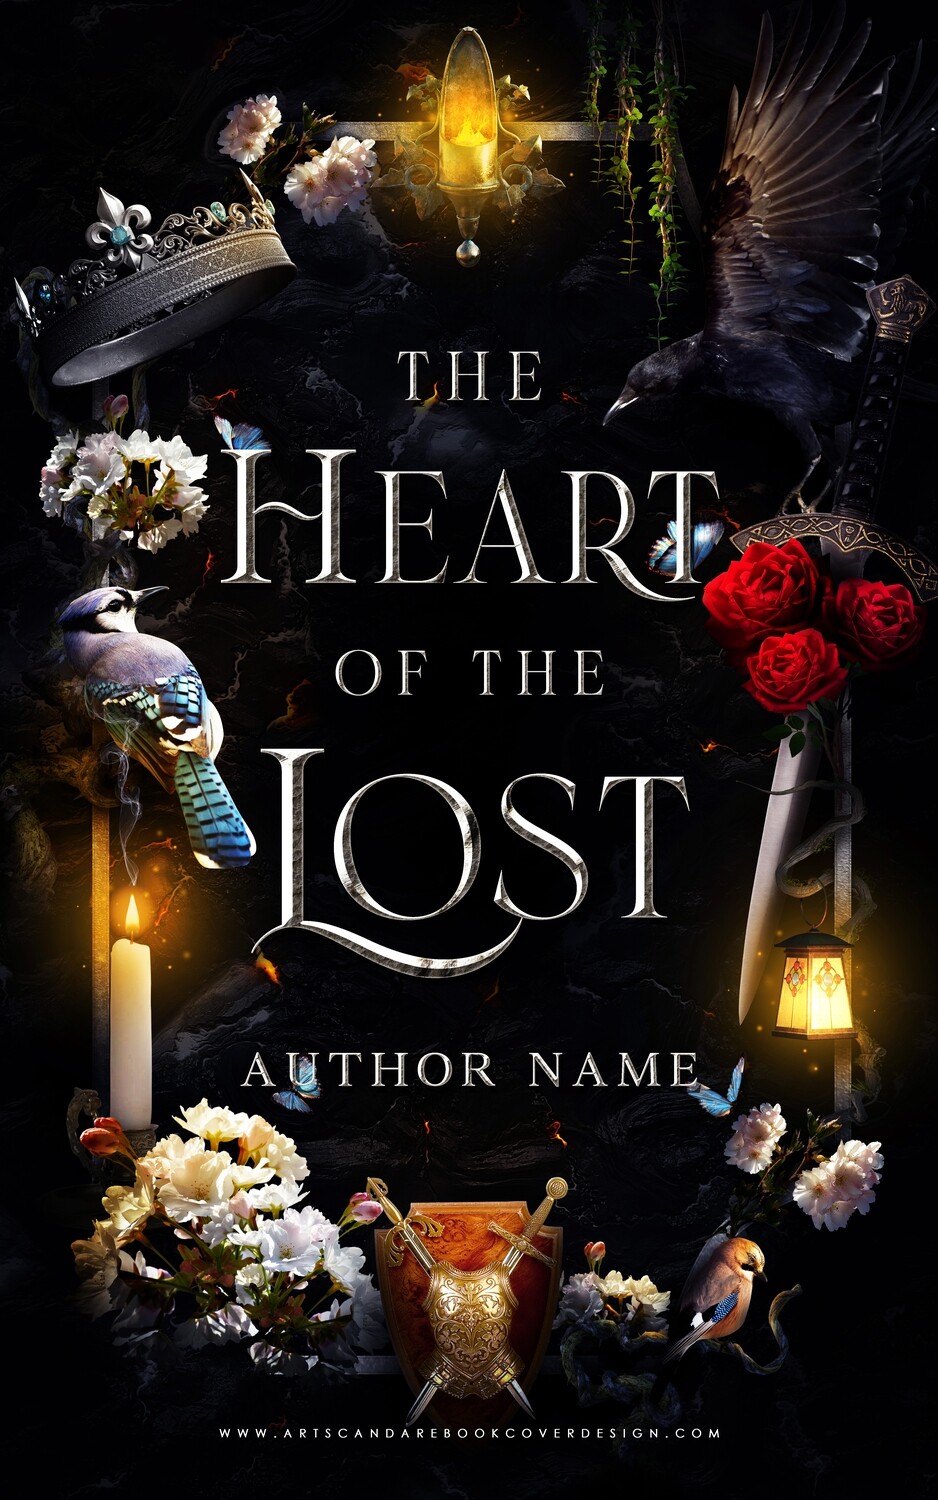 Ebook: The Heart of the Lost